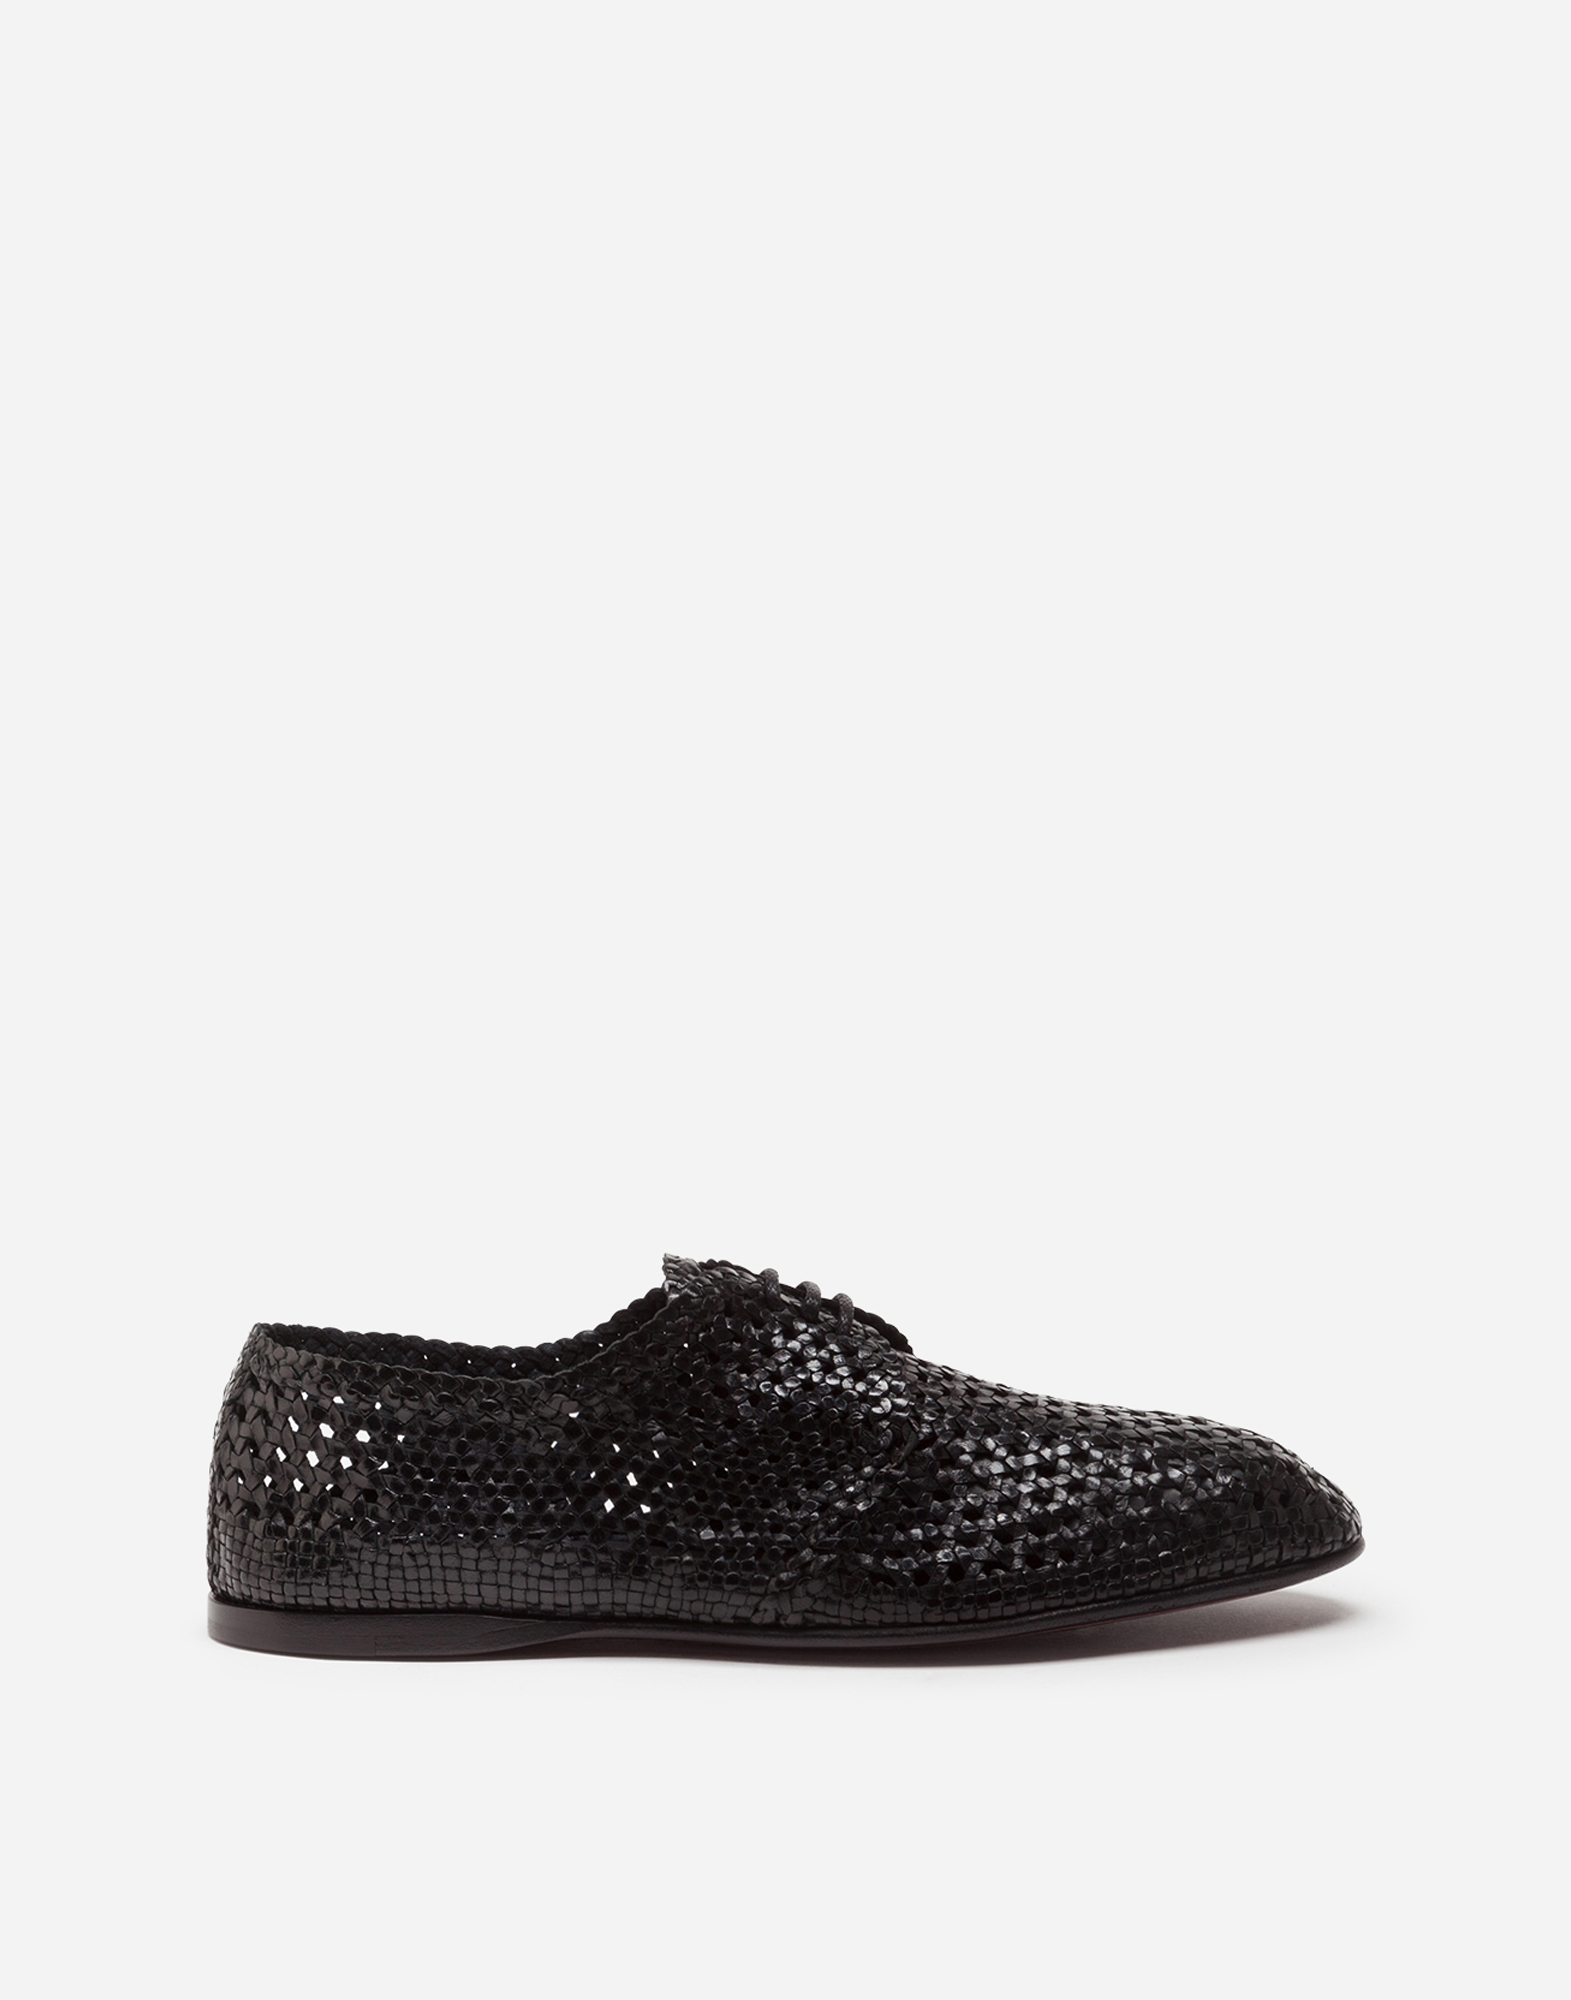 Hand-woven derby shoes in Black